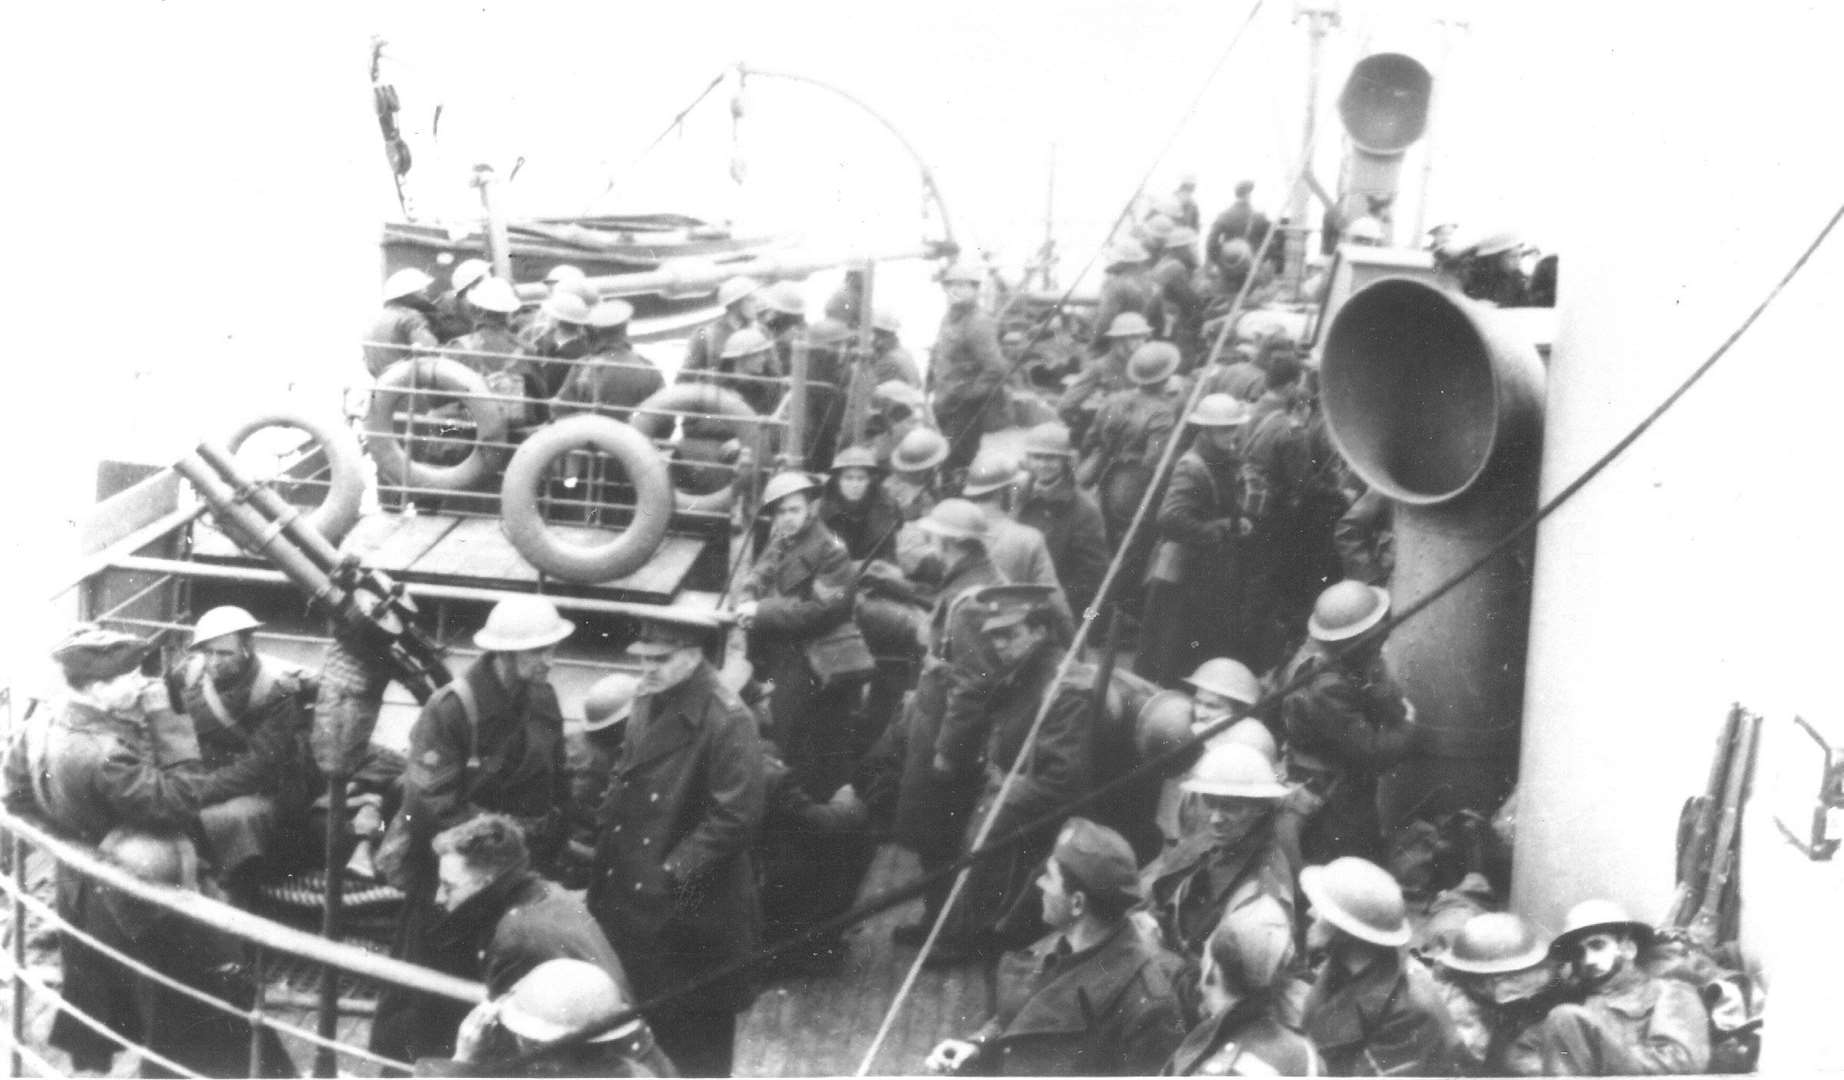 The Medway Queen loaded with soldiers evacuated from Dunkirk